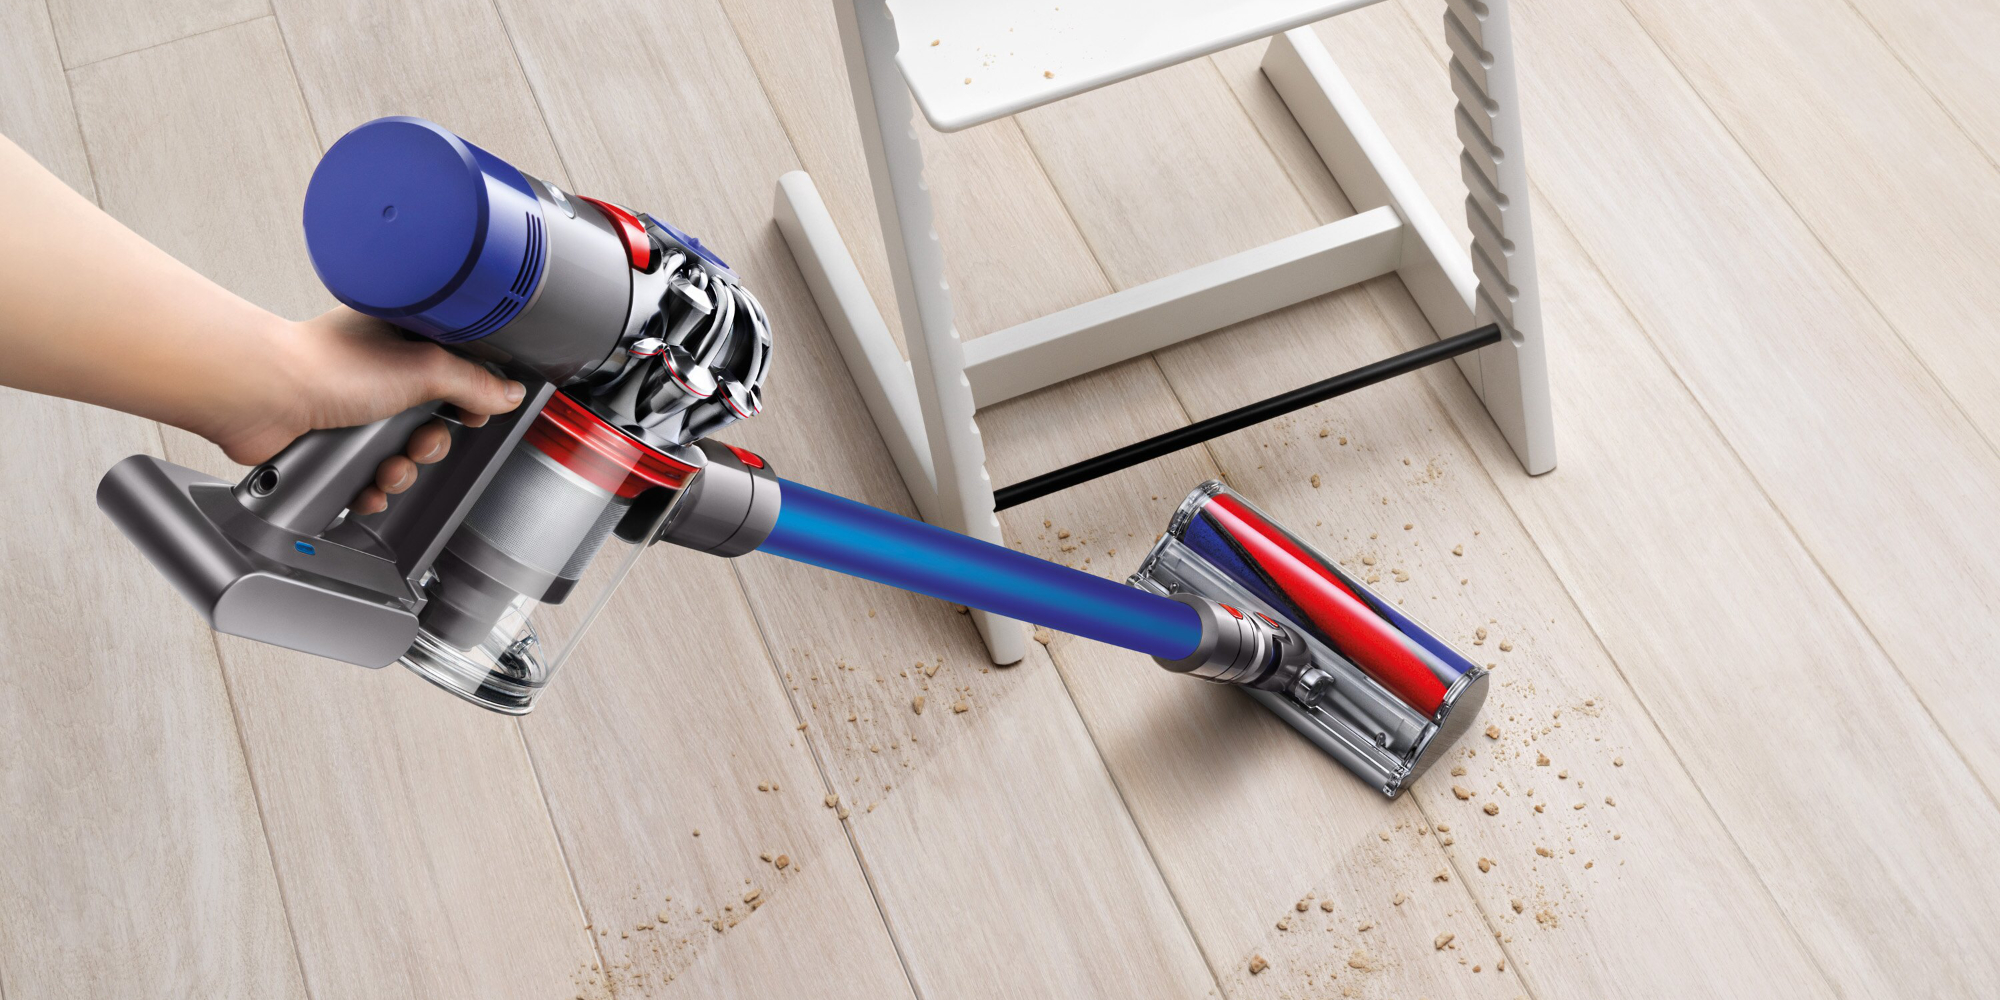 A new Dyson V7 Fluffy Cordless Vacuum is yours for $200 (Reg. $330 